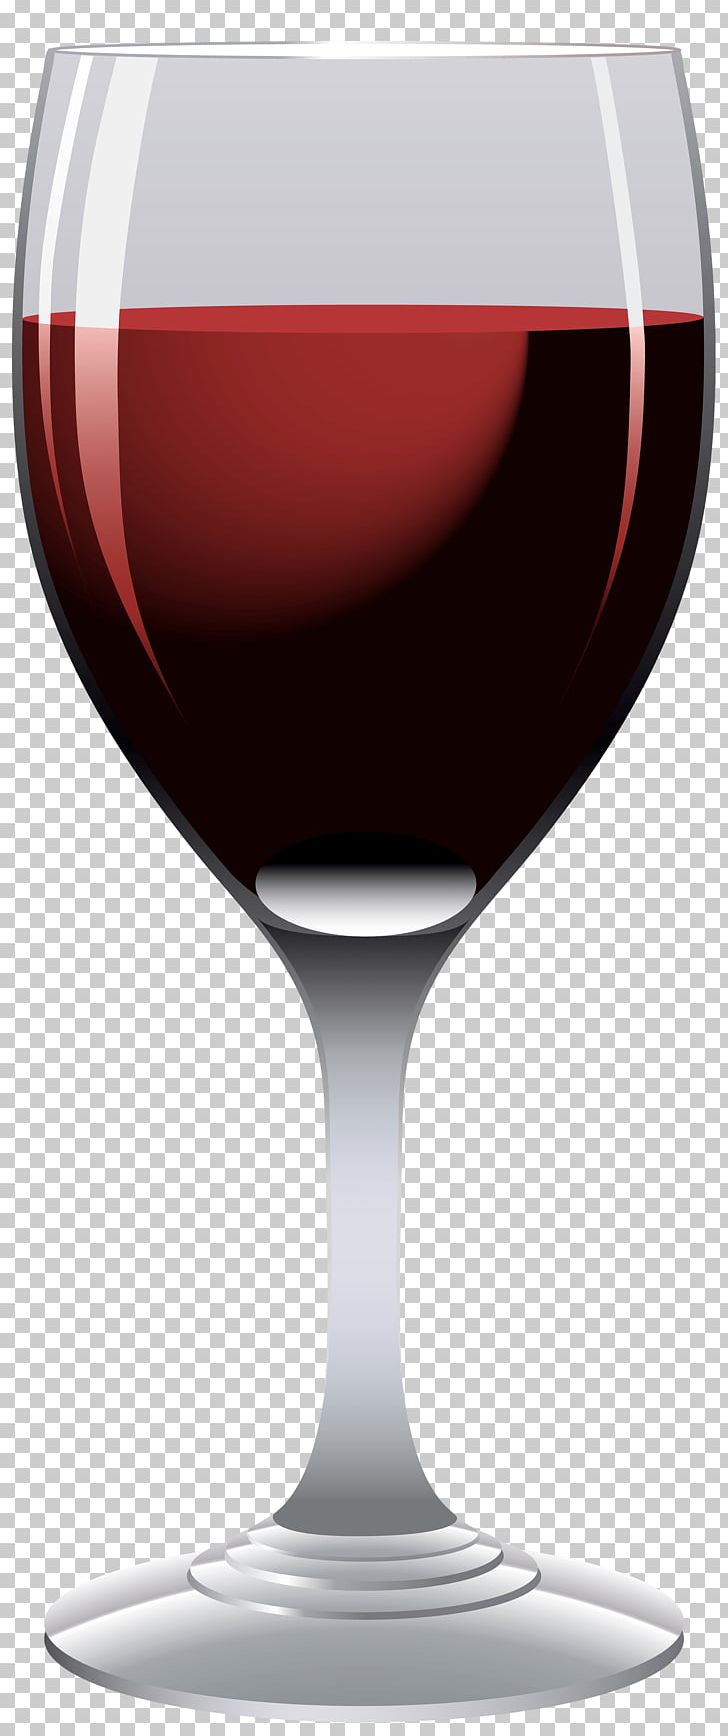 Wine Glass Red Wine PNG, Clipart, Bottle, Champagne Stemware, Drinkware, Food Drinks, Glass Free PNG Download